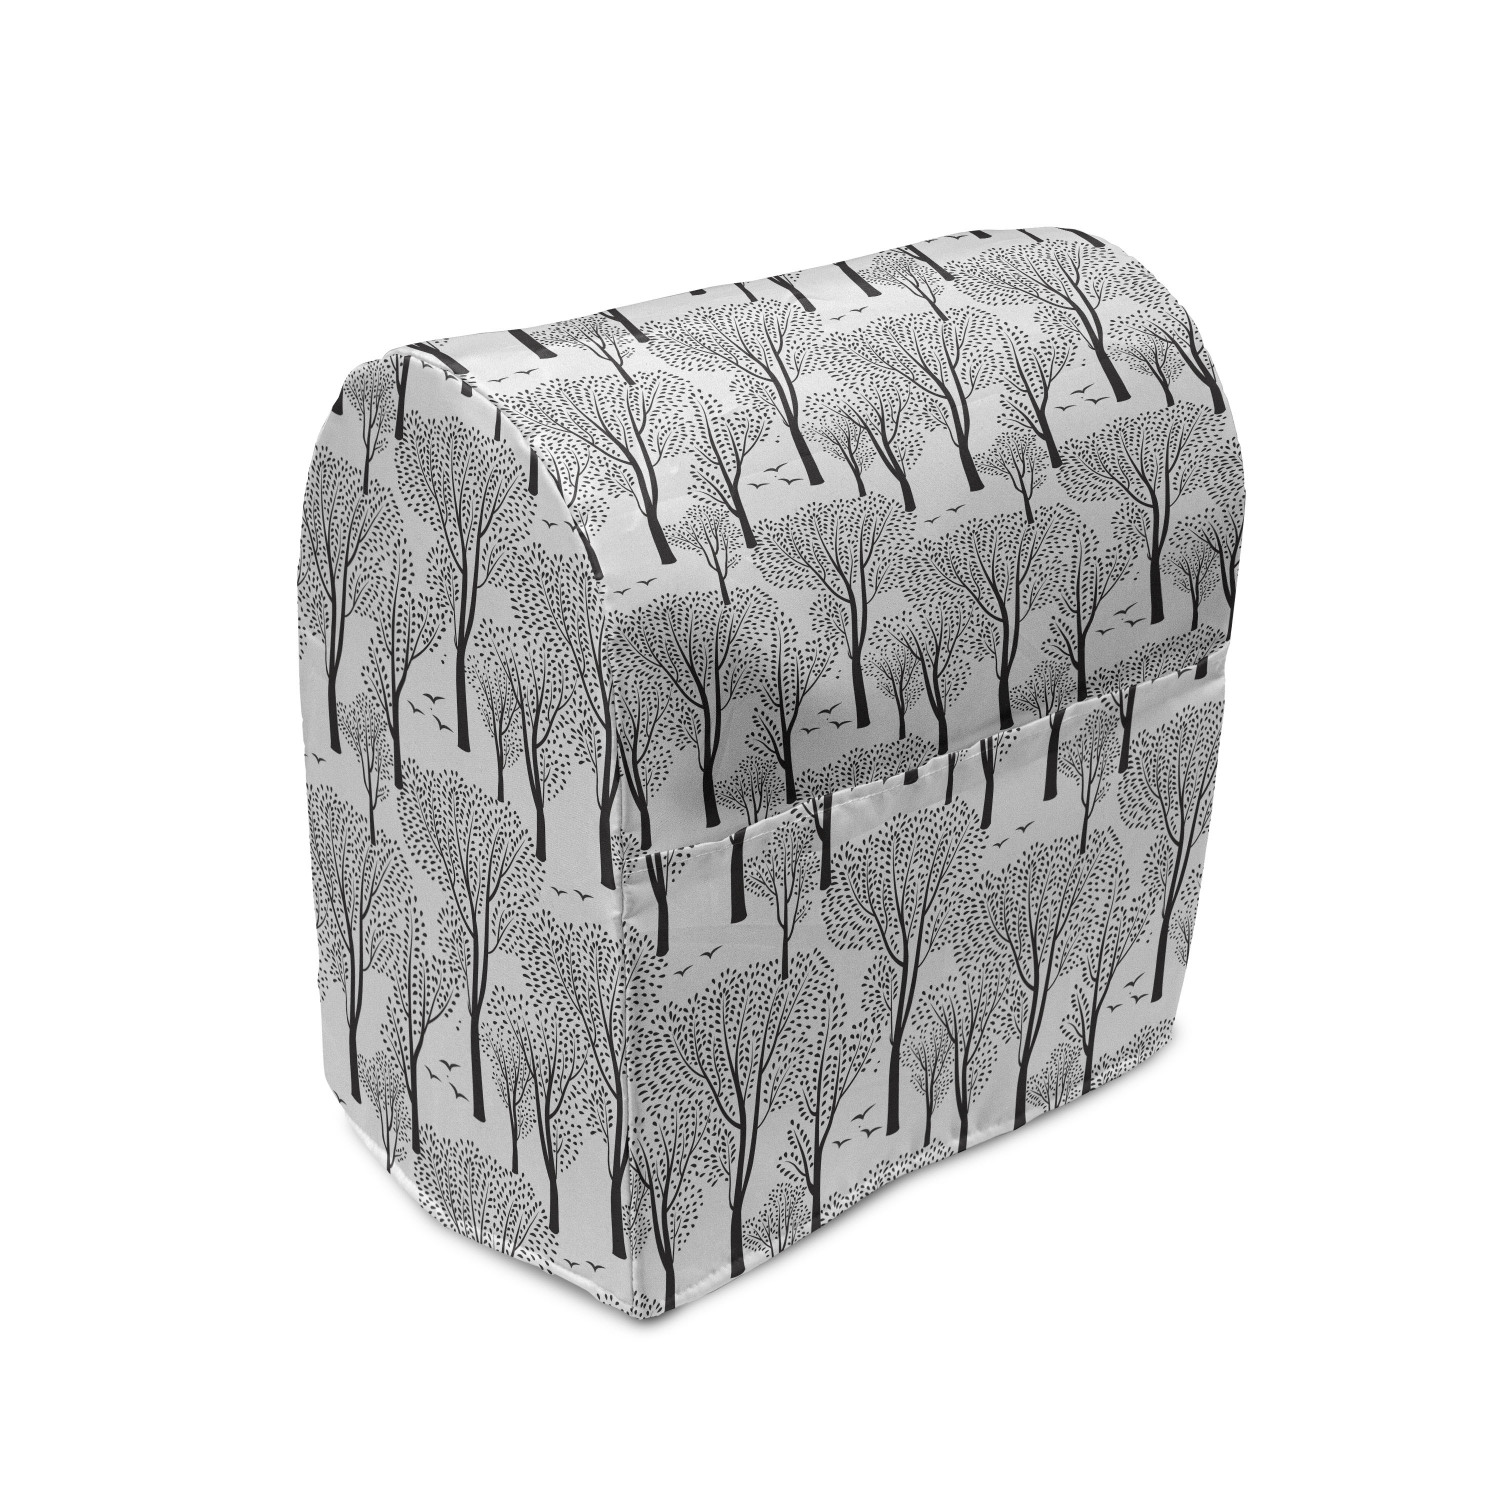 Winter Stand Mixer Cover, Monochrome Abstract Forest Pattern Trees Leaves Birds Wildlife Woodland Nature, Kitchen Appliance Organizer Bag Cover with Pockets, 5 Quarts, Black White, by Ambesonne - image 1 of 4